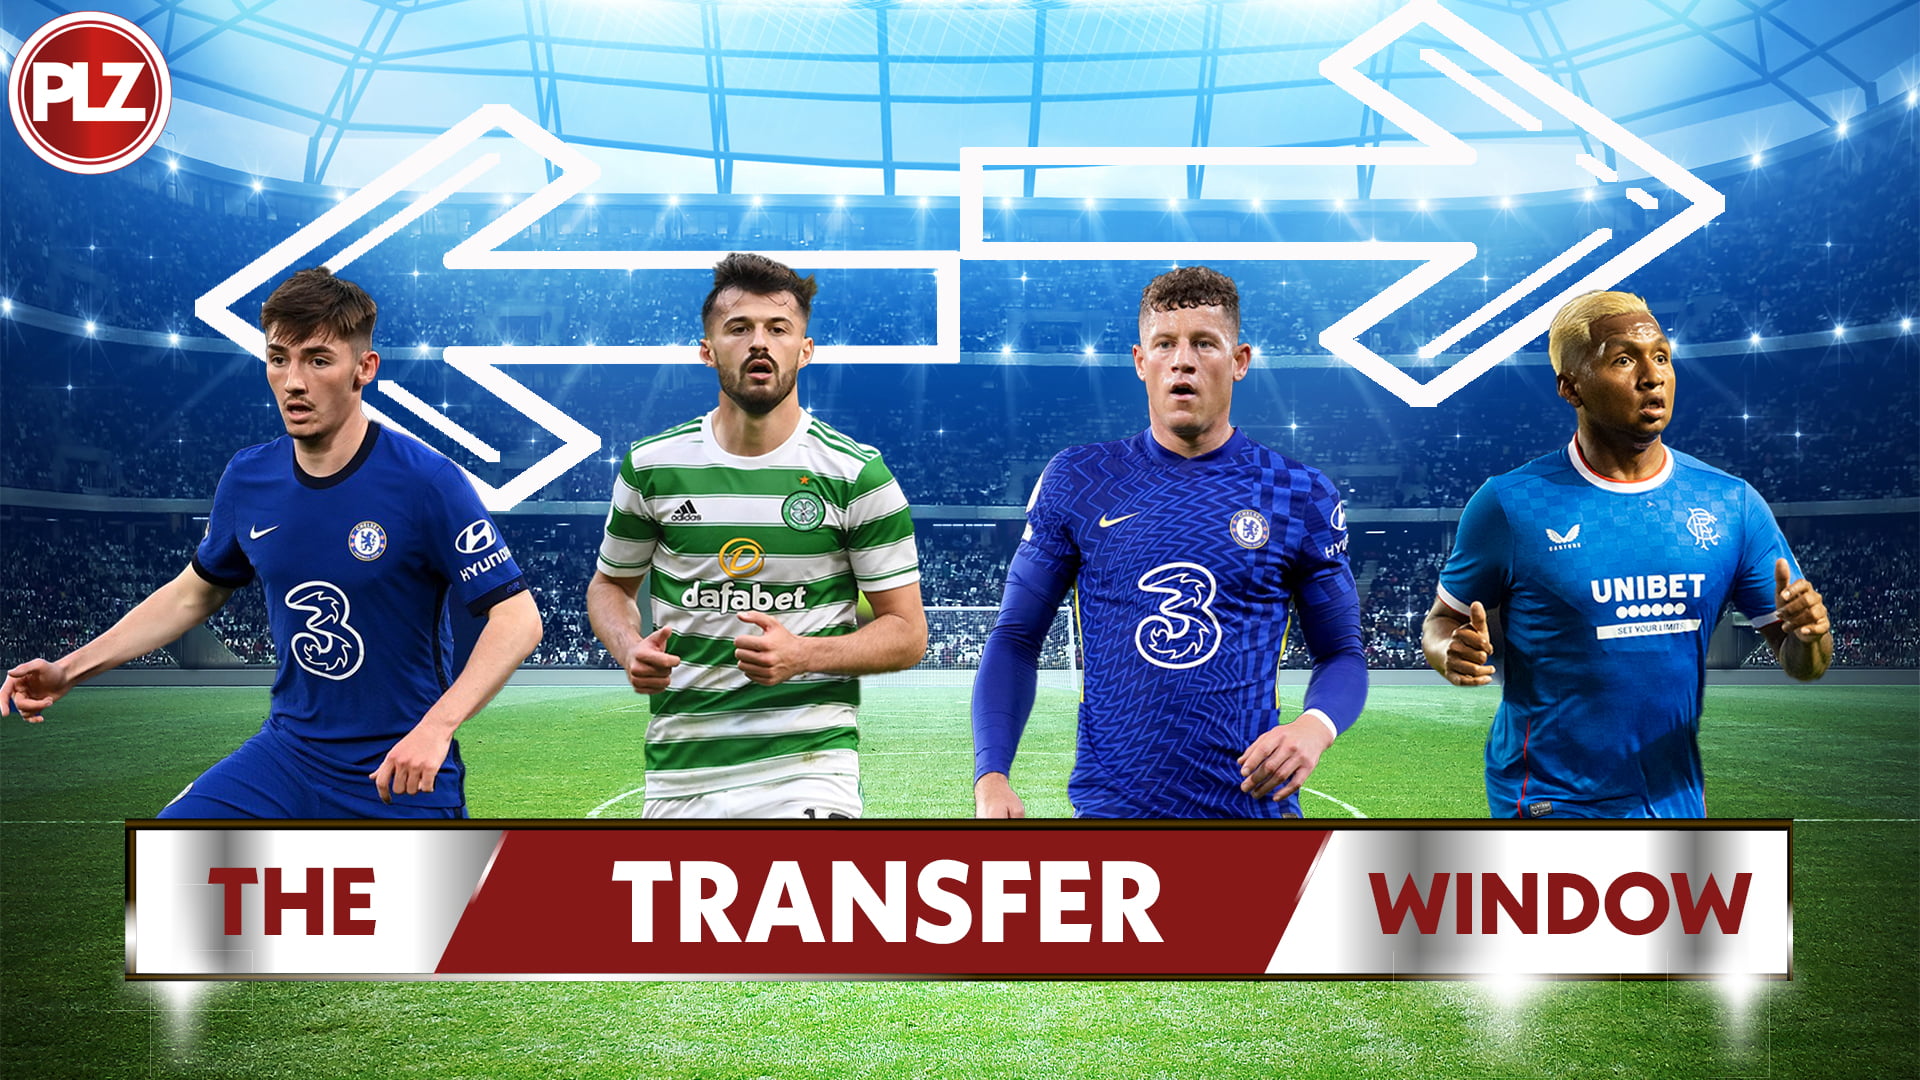 SUMMER TRANSFER WINDOW: SCOTTISH PREMIERSHIP INS AND OUTS